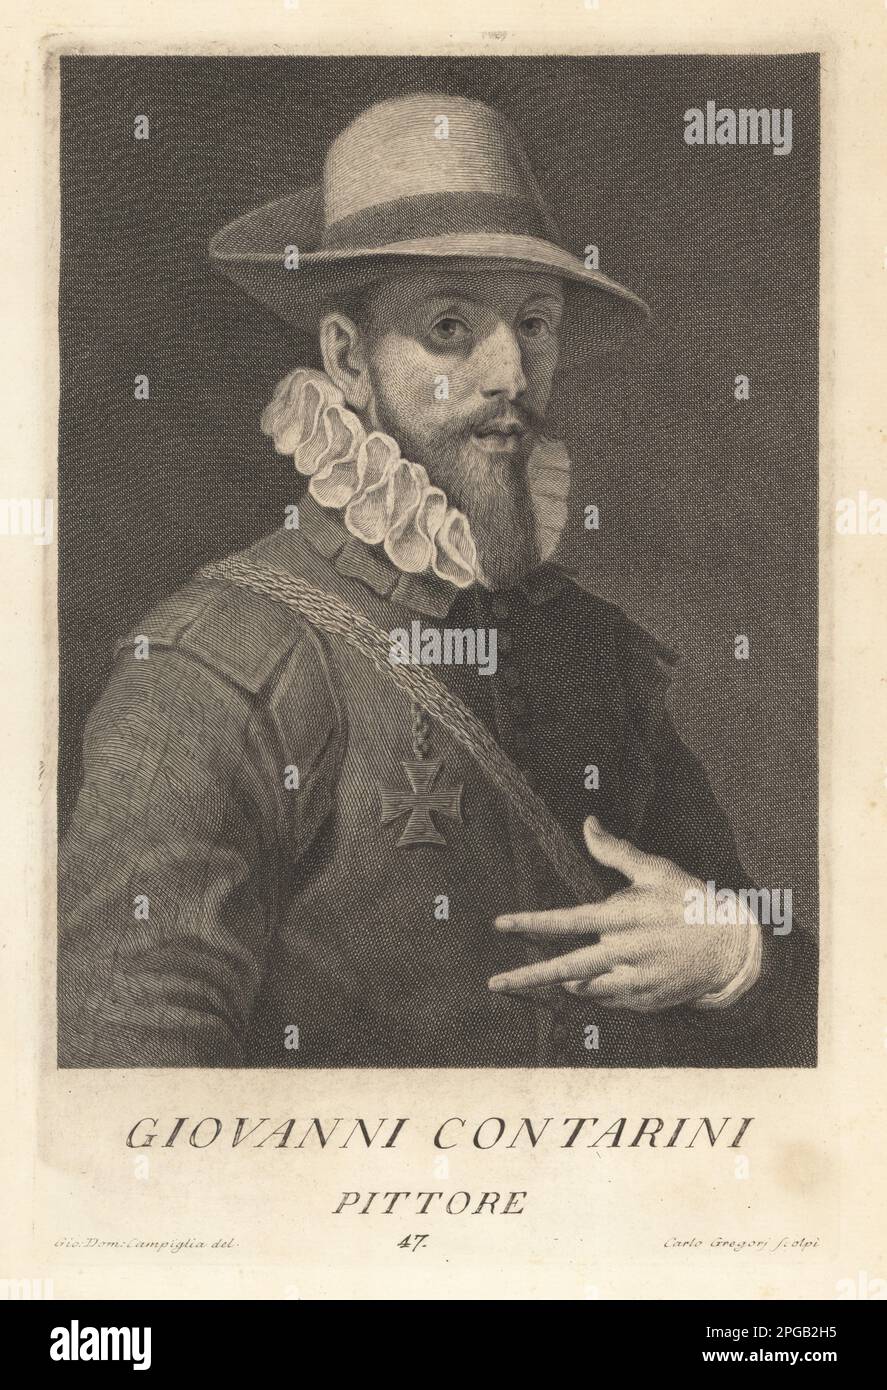 Giovanni Contarini, Italian painter of the late Renaissance, 1549–1605. Born in Venice, painter of portraits, altar pieces, ceilings and easel paintings of mythological subjects. Cavaliere Giovanni Contarini, Pittore. Copperplate engraving by Carlo Gregori after Giovanni Domenico Campiglia after a self portrait by the artist from Francesco Moucke's Museo Florentino (Museum Florentinum), Serie di Ritratti de Pittori (Series of Portraits of Painters) stamperia Mouckiana, Florence, 1752-62. Stock Photo